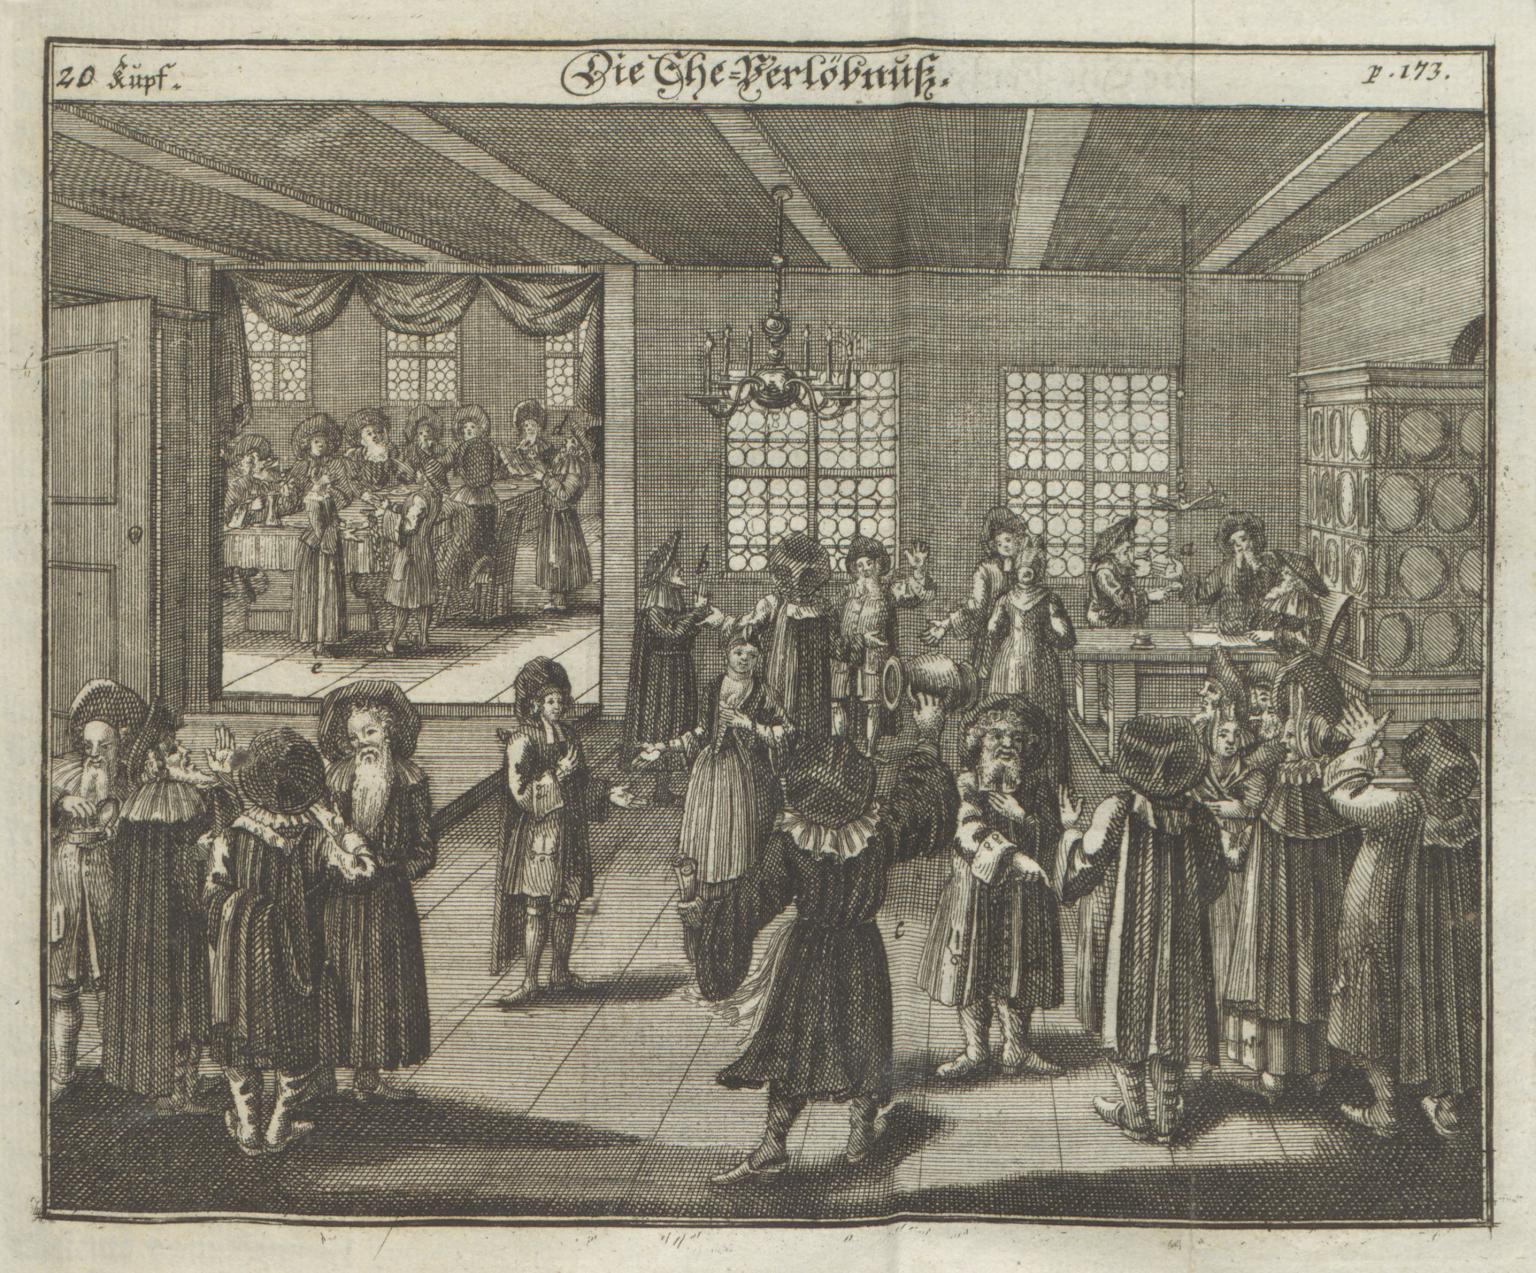 Print engraving with groups of people in room talking, with open door to another room in background. 